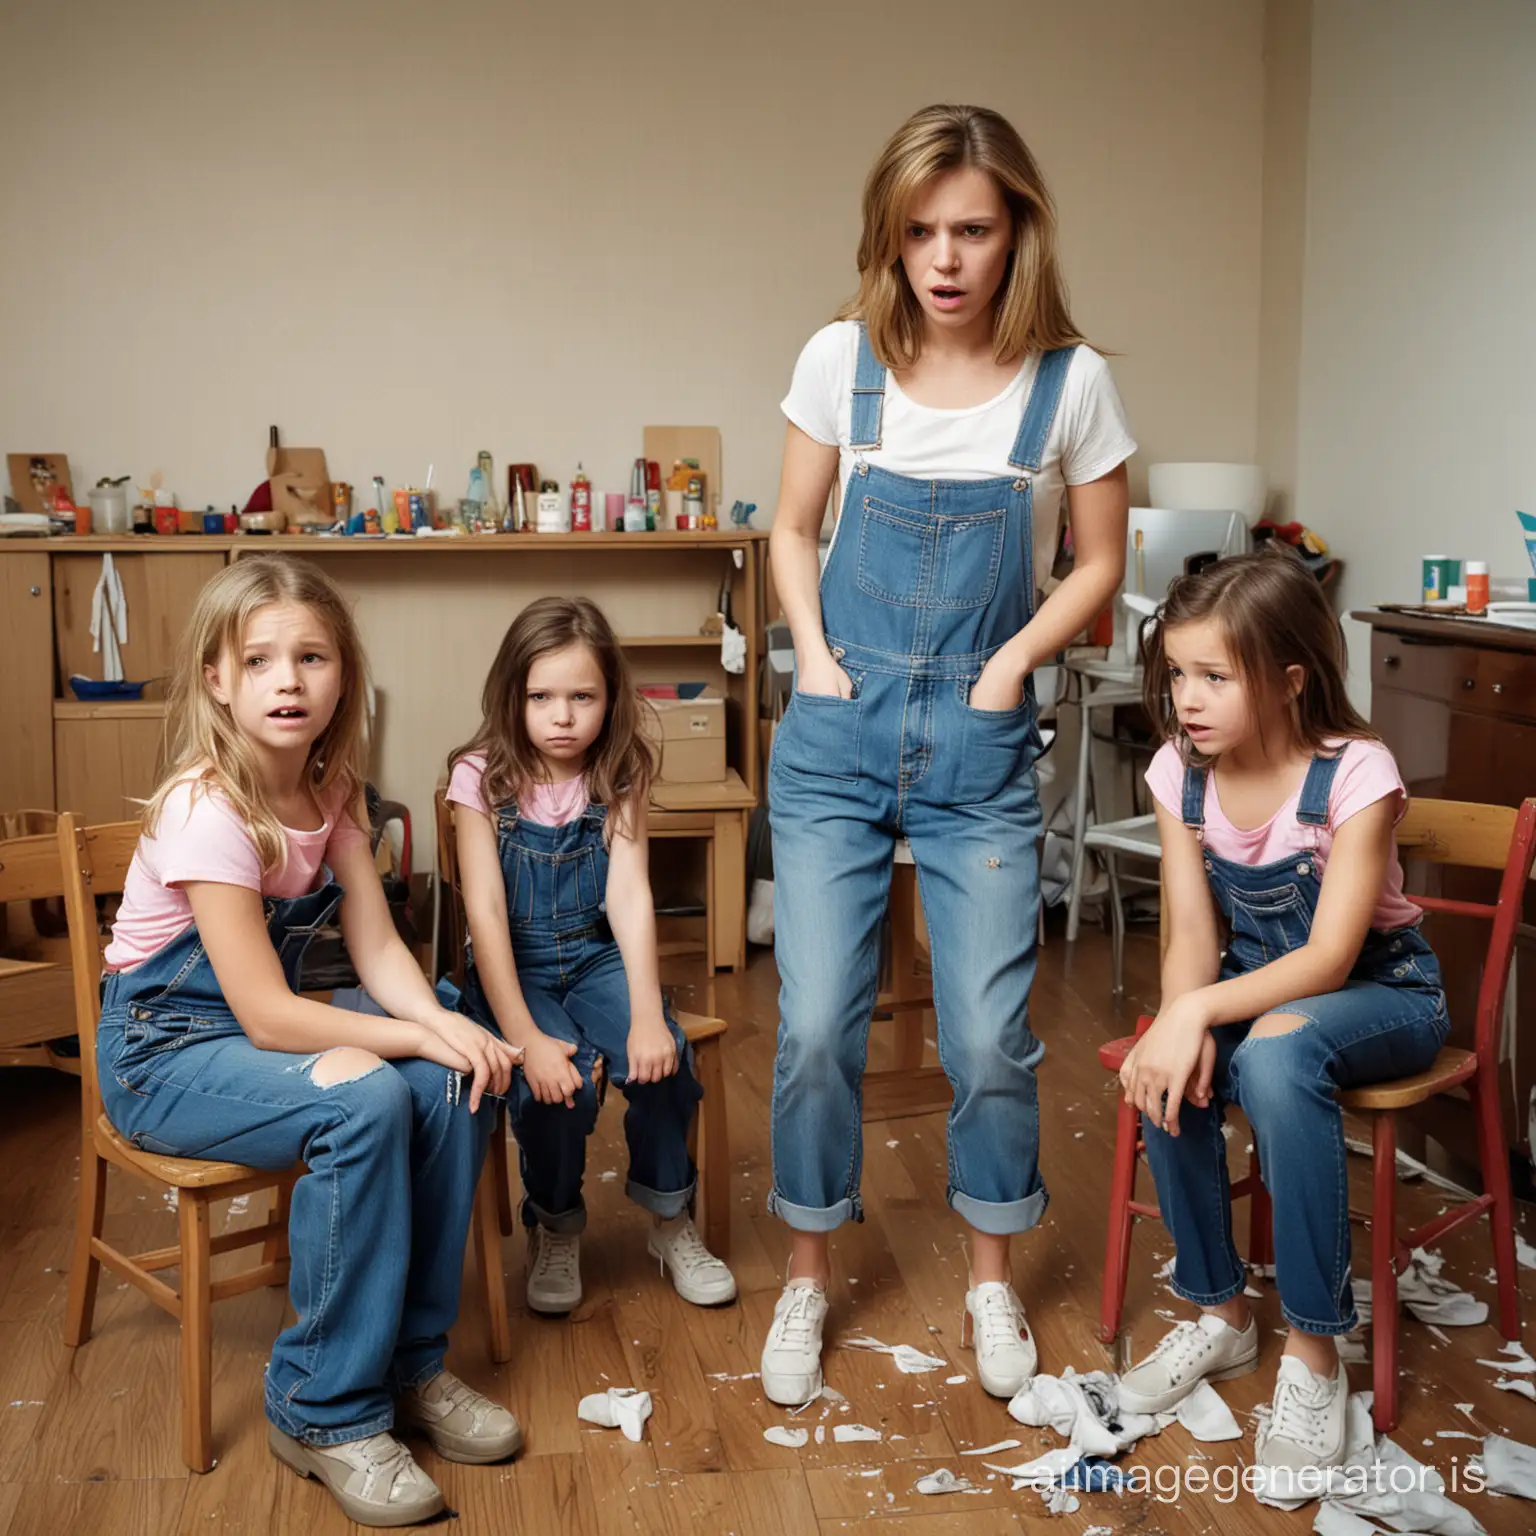 photo of three girls in a messy children’s room. The girl on the left stands,10 years old,wearing overalls,stern face. In the middle, the mother is seated on a chair, wearing very skinny jeans with a belt. She has a stern face and she is scolding severely the girl on the right, 7 years old, crying, on her knees.